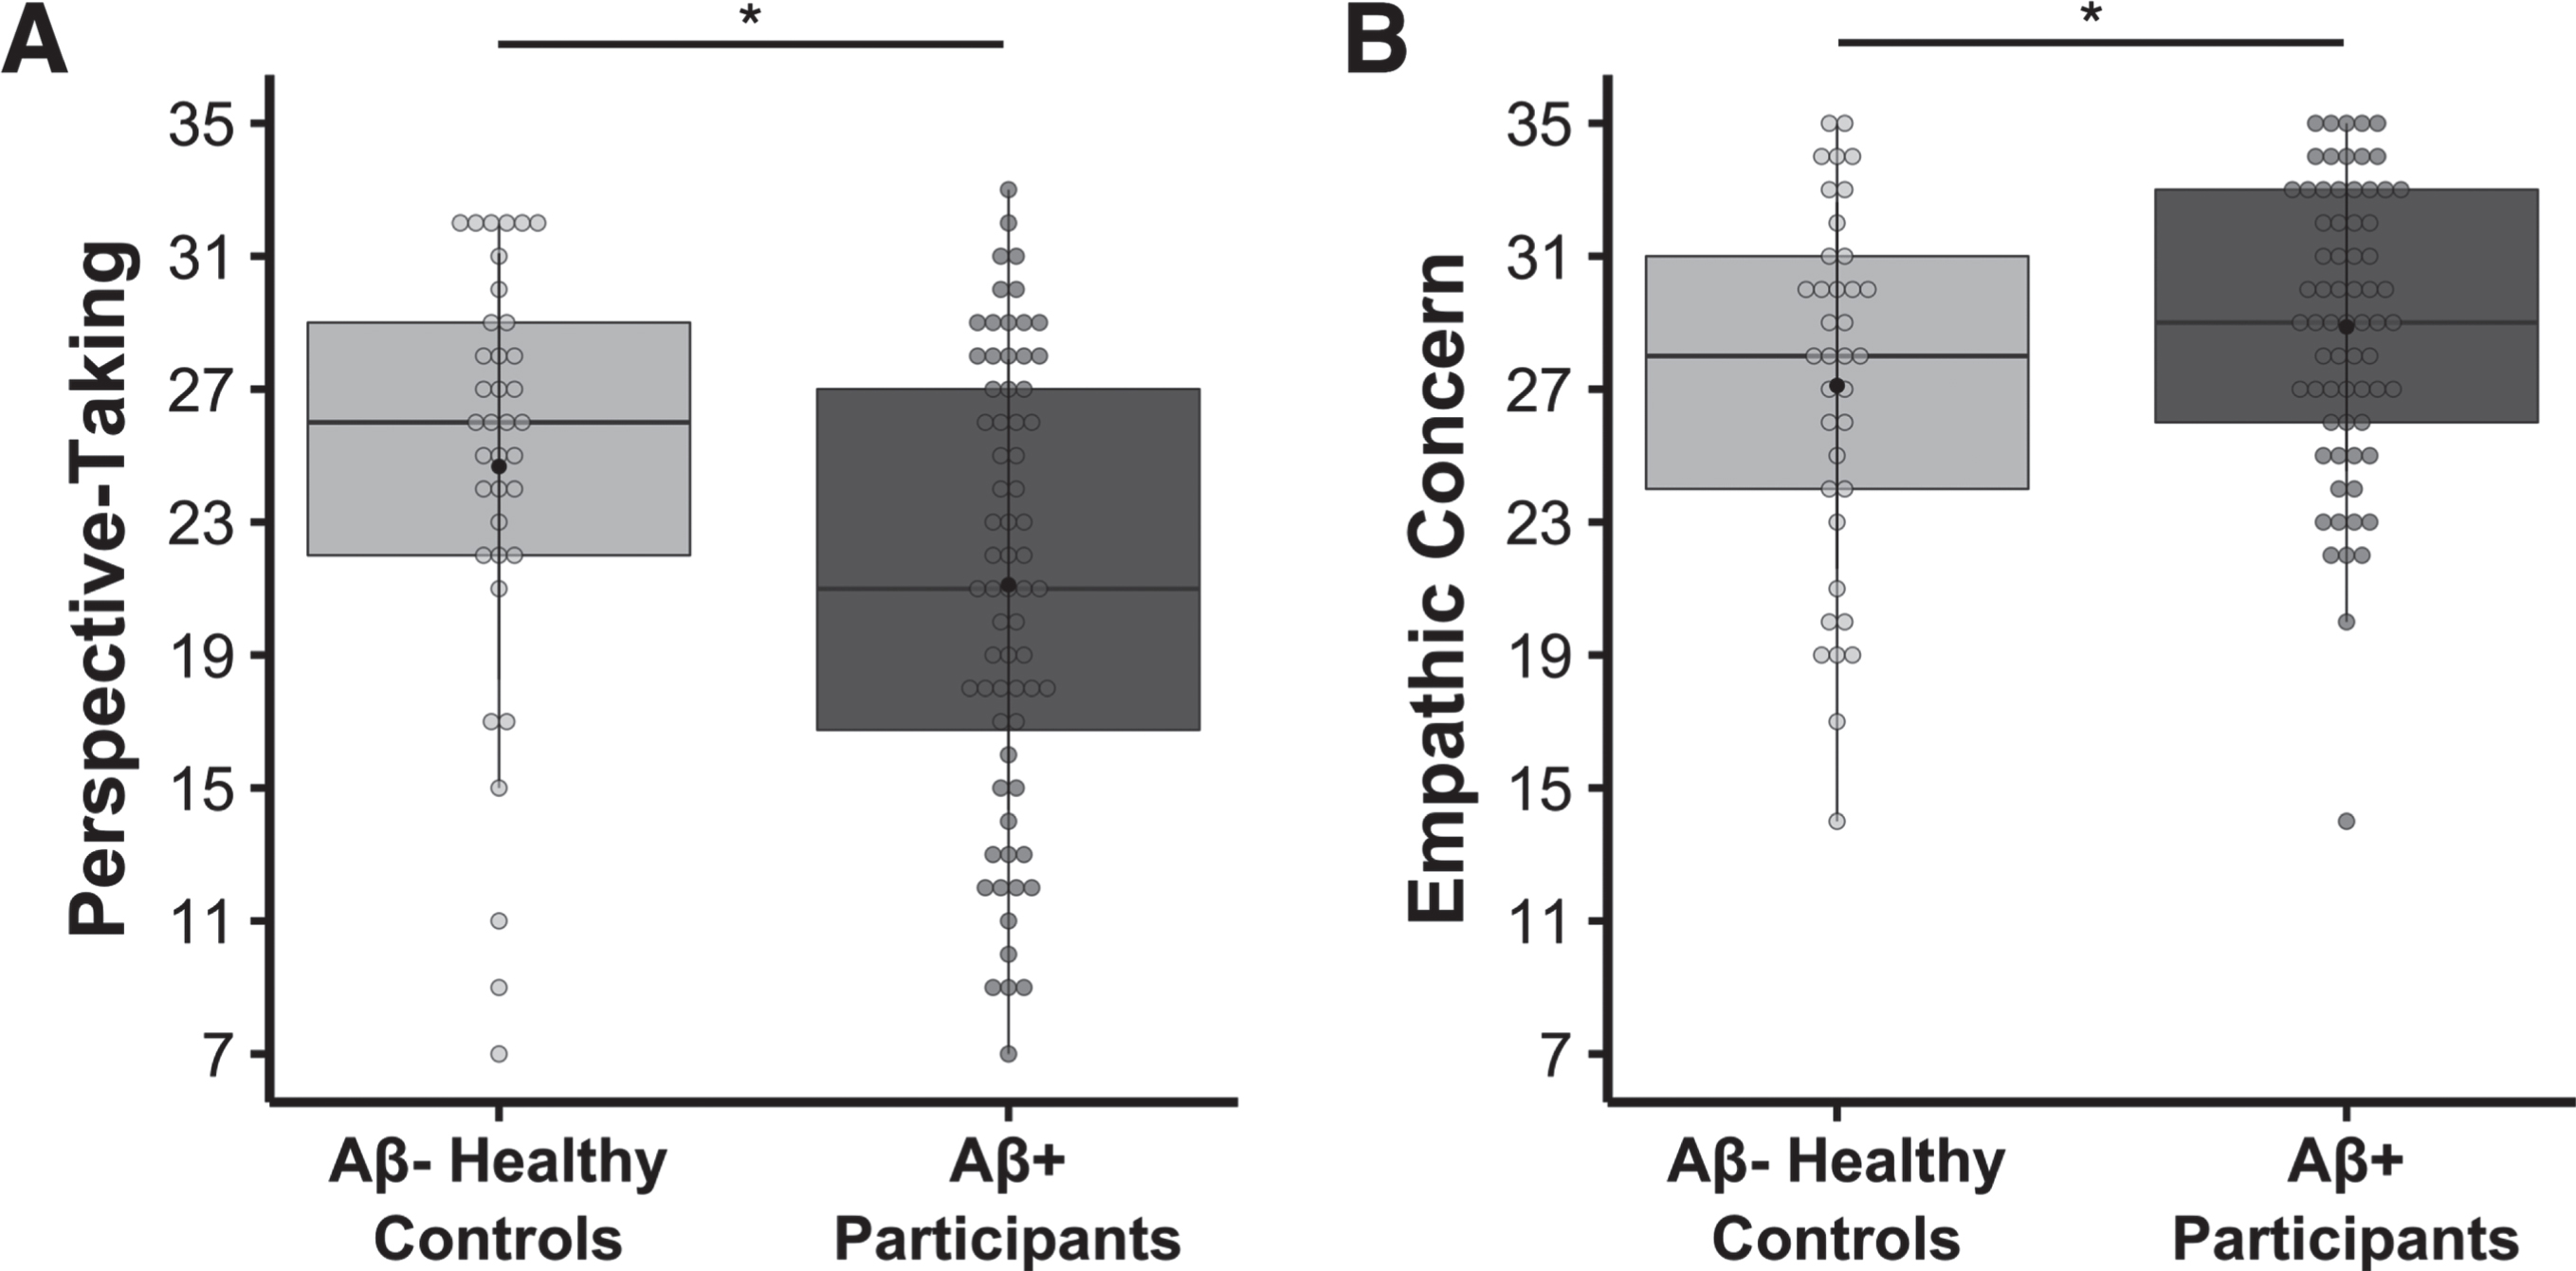 Lower perspective-taking, but higher empathic concern, in the Aβ+ symptomatic participants relative to the Aβ- healthy controls. Multivariate linear regression analyses found that, compared to Aβ- healthy controls, the Aβ+ symptomatic group had A) lower perspective-taking (b = –5.339, t(100) = –4.824, p = 5.039 × 10–6, model adjusted R2 = 0.431, n = 105) and B) higher empathic concern (b = 3.550, t(100) = 4.925, p = 3.344 × 10–6, model adjusted R2 = 0.513, n = 105). Covariates of non-interest in these models included age at IRI, gender, and the contrasting IRI subscale (i.e., empathic concern or perspective-taking). Raw perspective-taking scores and empathic concern scores are shown in the figure.